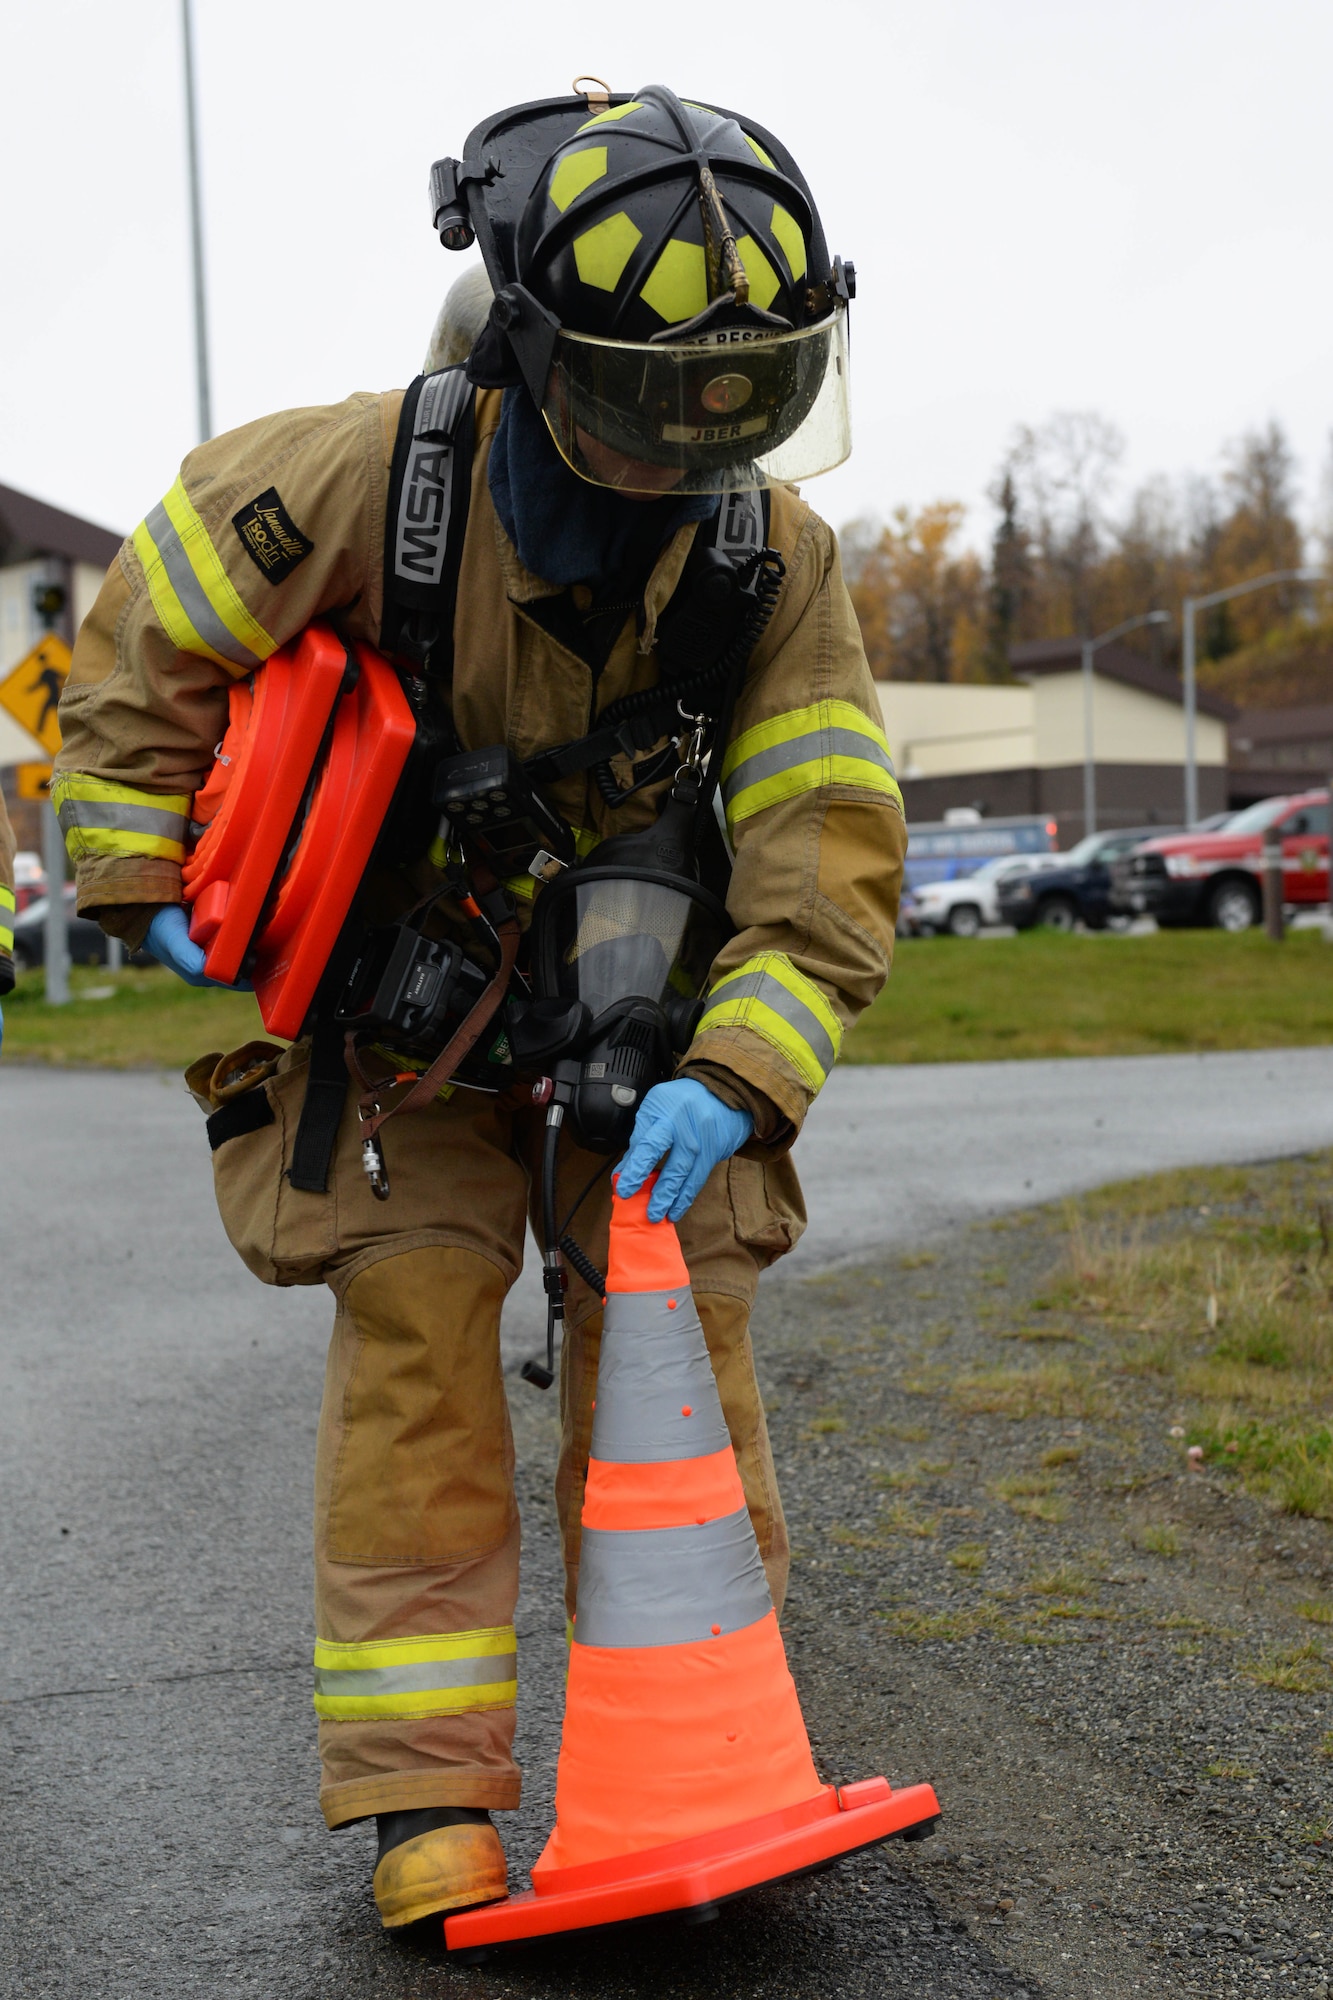 Senior Airman William White, fire protection specialist with the 673d Civil Engineer Squadron picks up a road cone during a fuel spill exercise Oct. 5, 2017, at Joint Base Elmendorf-Richardson, Alaska. White participated in a fuel spill exercise simulation, which tested the response actions of base recovery agencies in the event of a mass fuel spill, to ensure installation safety and minimal environmental impact.